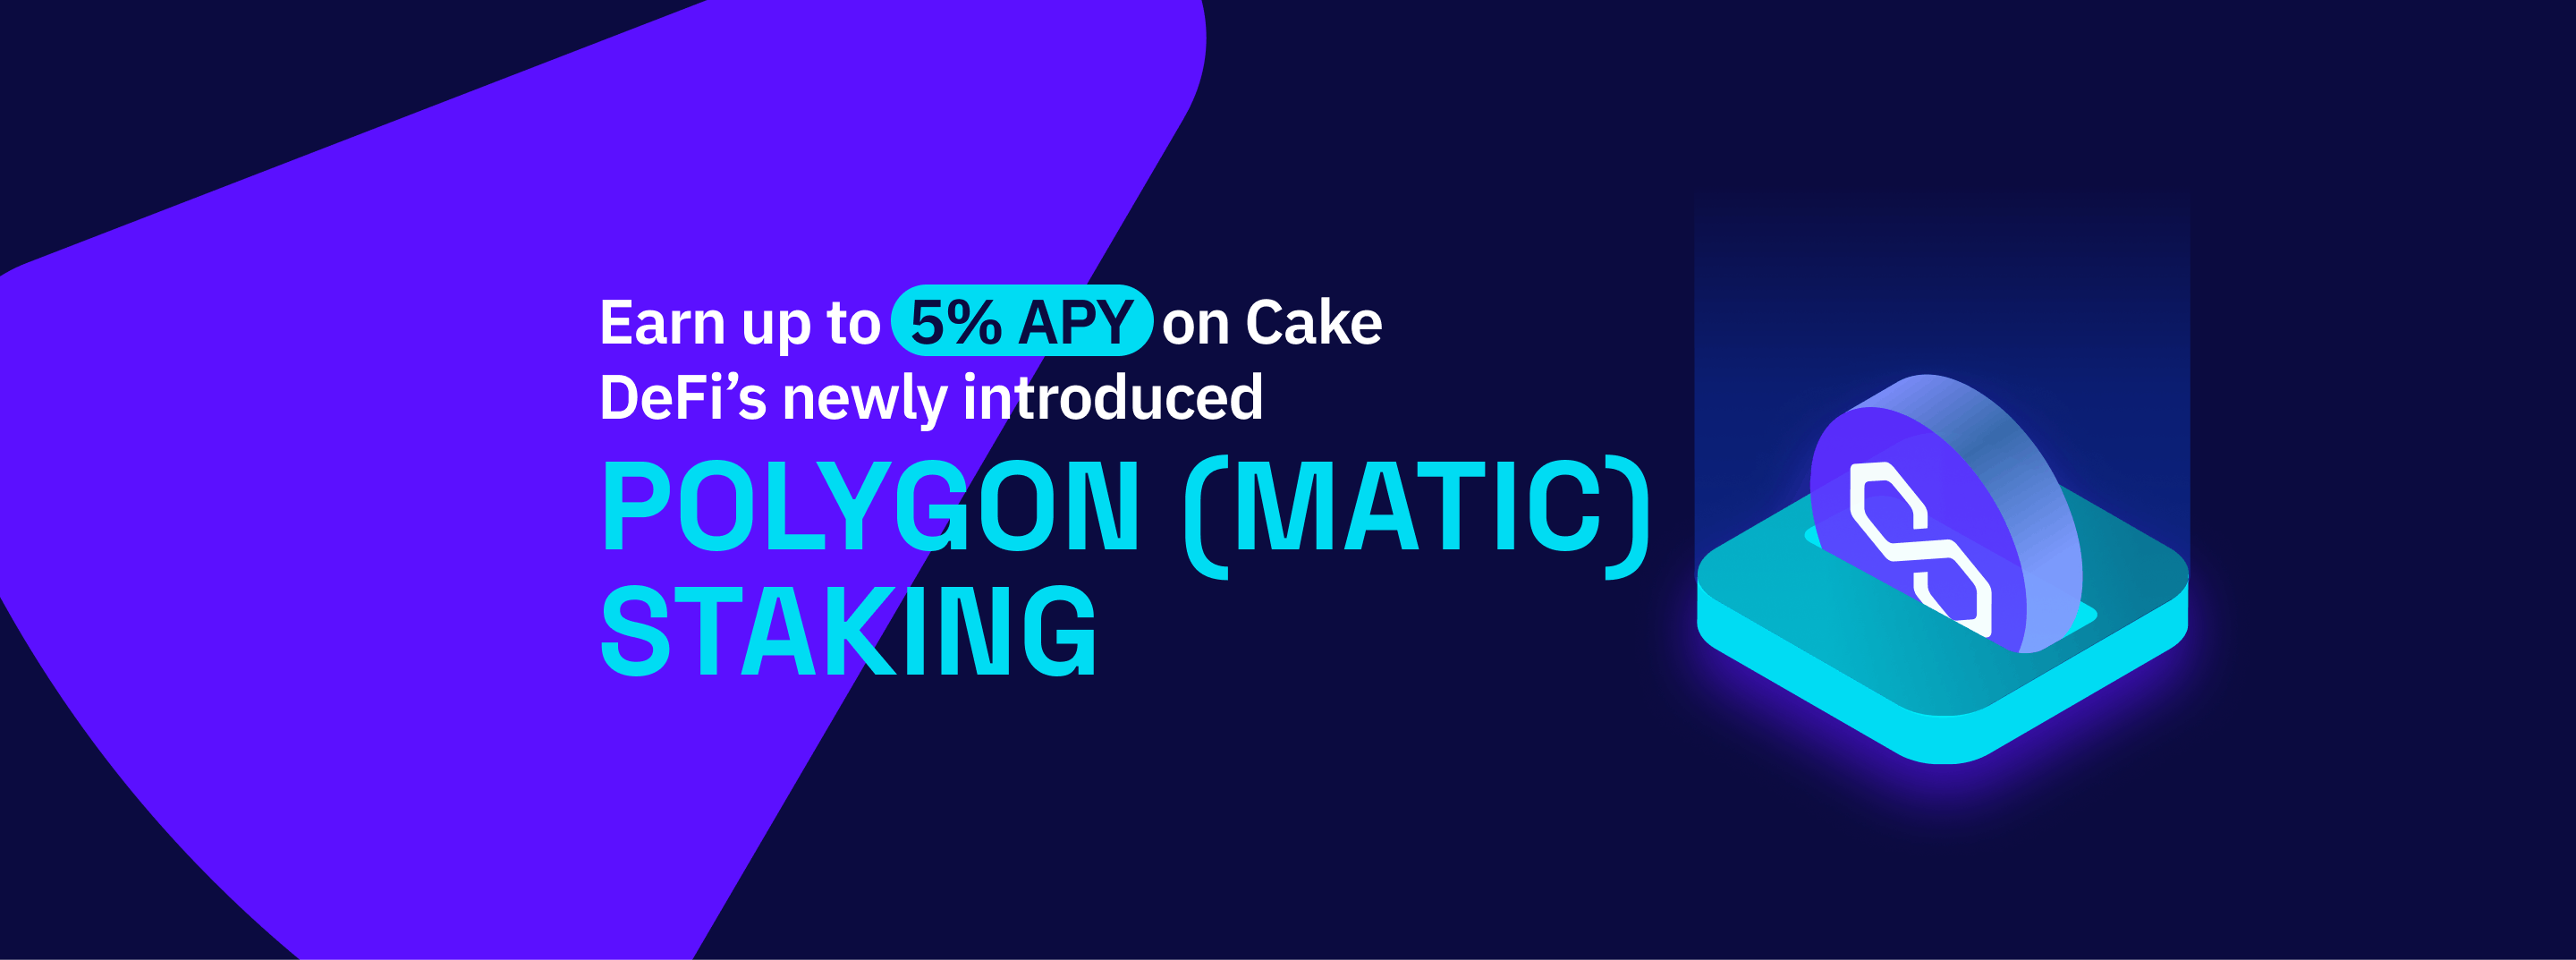 Earn Up To 5% APY On Cake DeFi's Newly Introduced Polygon (MATIC)